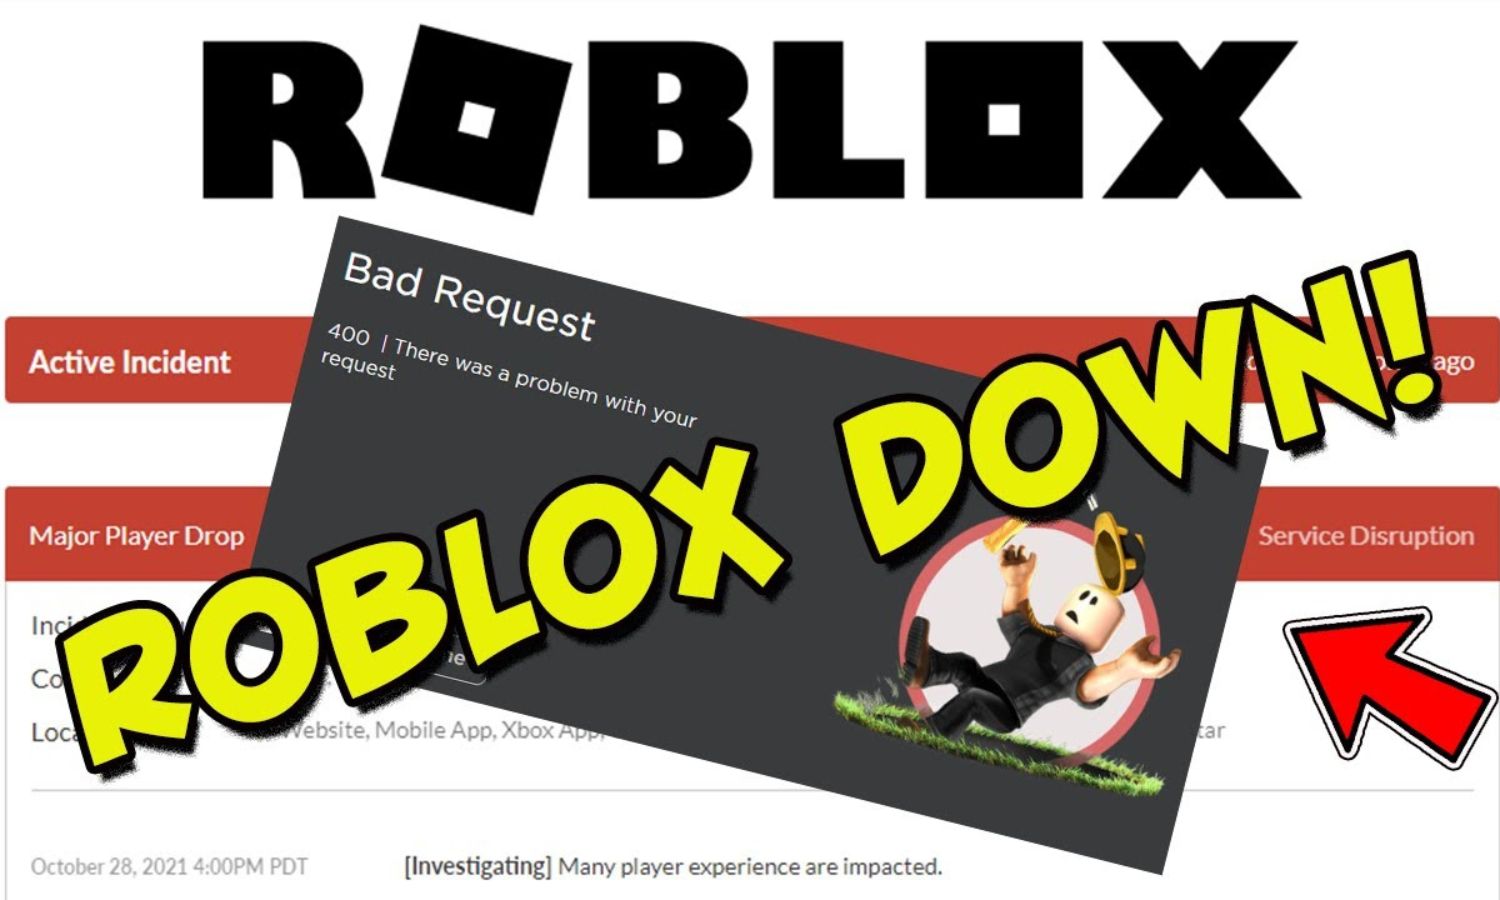 Roblox Website Status. Check if Roblox Website is down or having